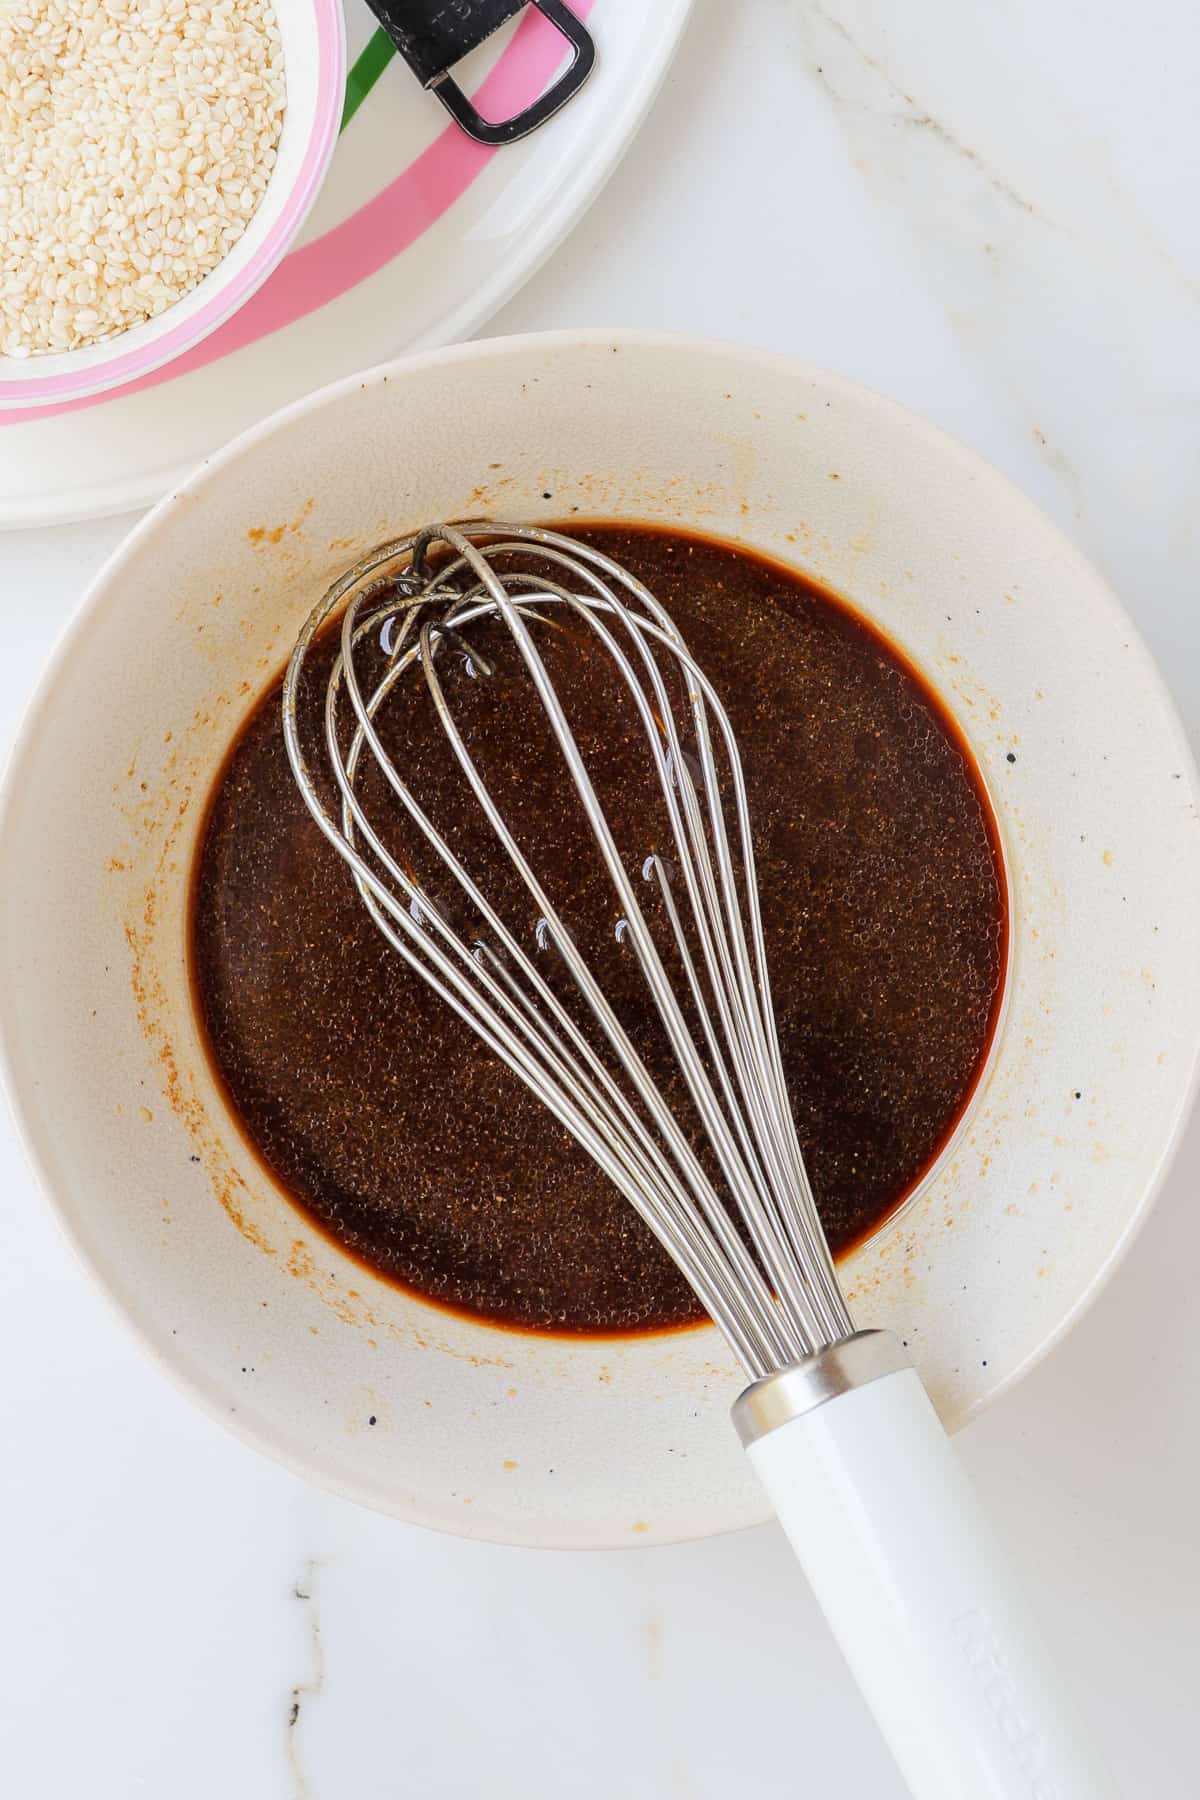 Teriyaki sauce being whisked in a bowl.